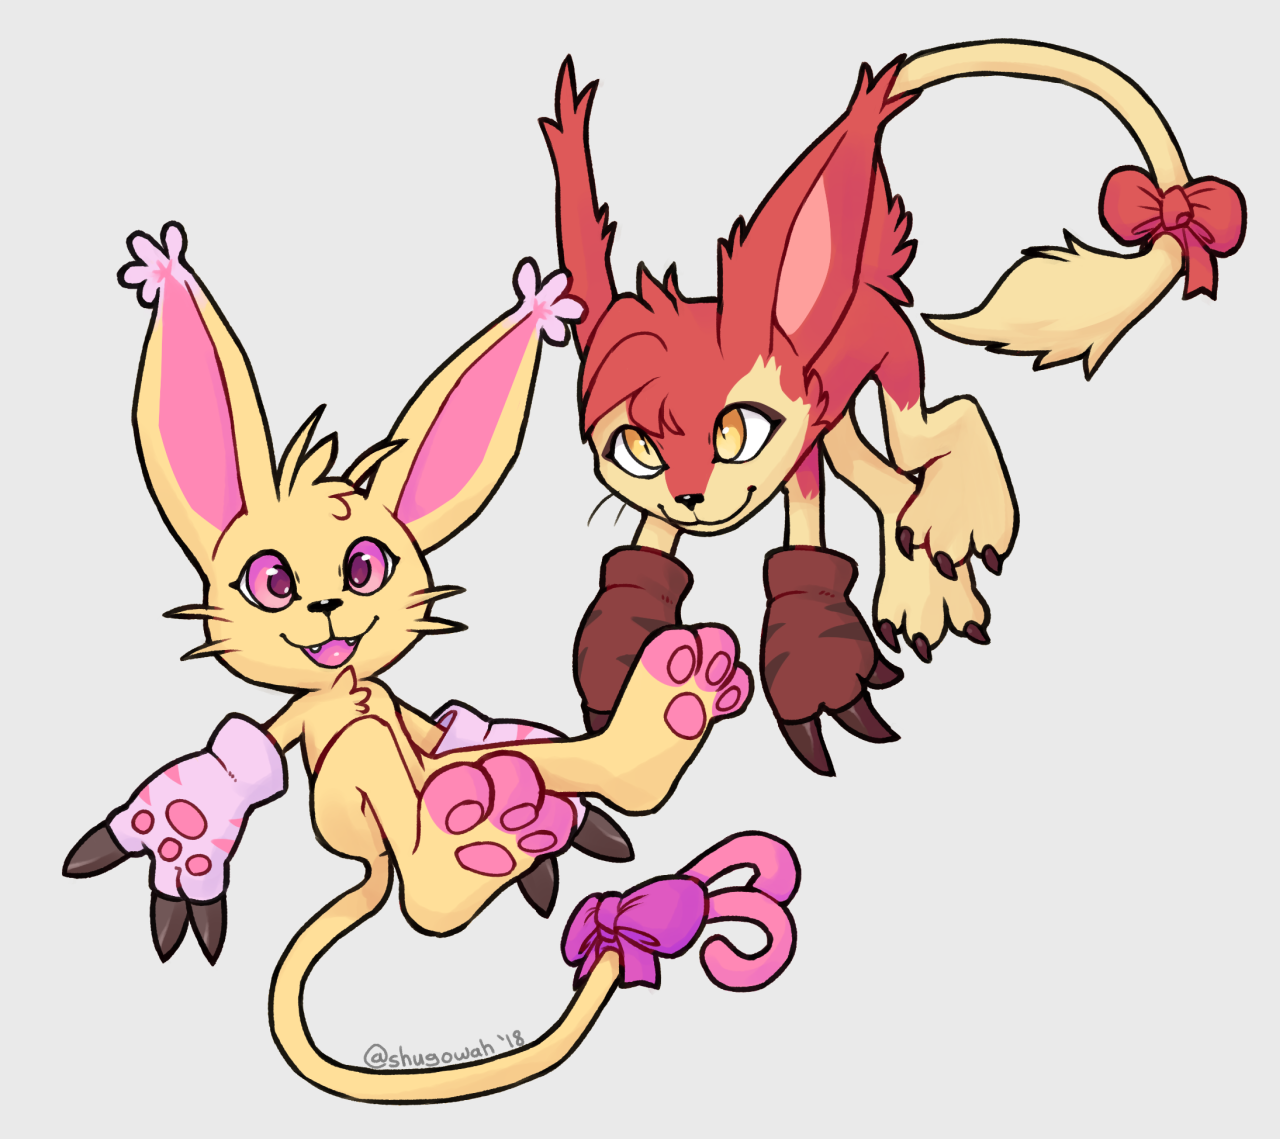 Sugar and Shugo as Gatomon!

Shugo was talking about where their Meowth might look like as a Gatomon and I got curious too.